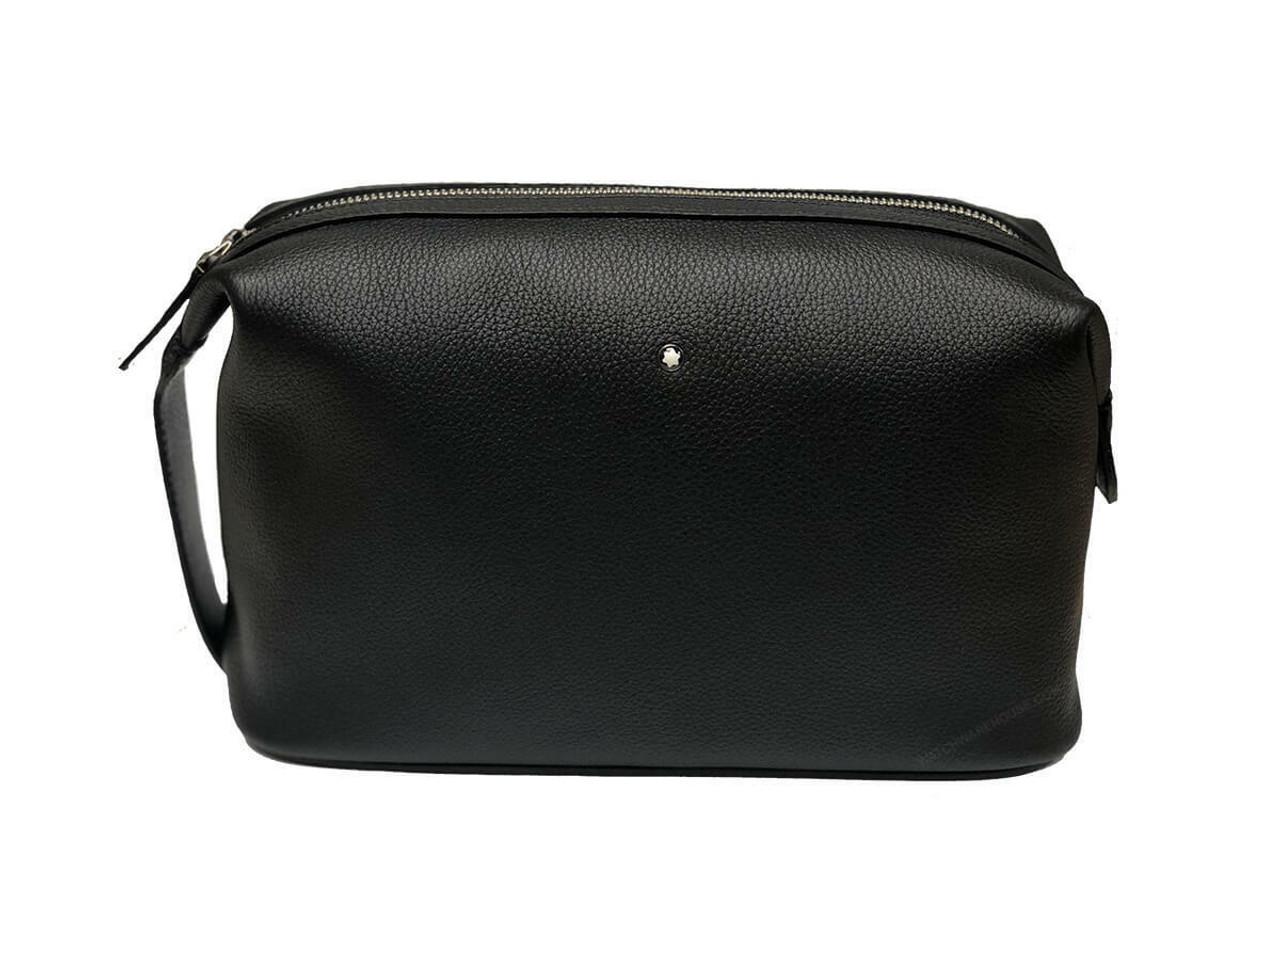 MONTBLANC Meisterstuck Soft Grain Black Leather Waist Bag 128509, Fast &  Free US Shipping